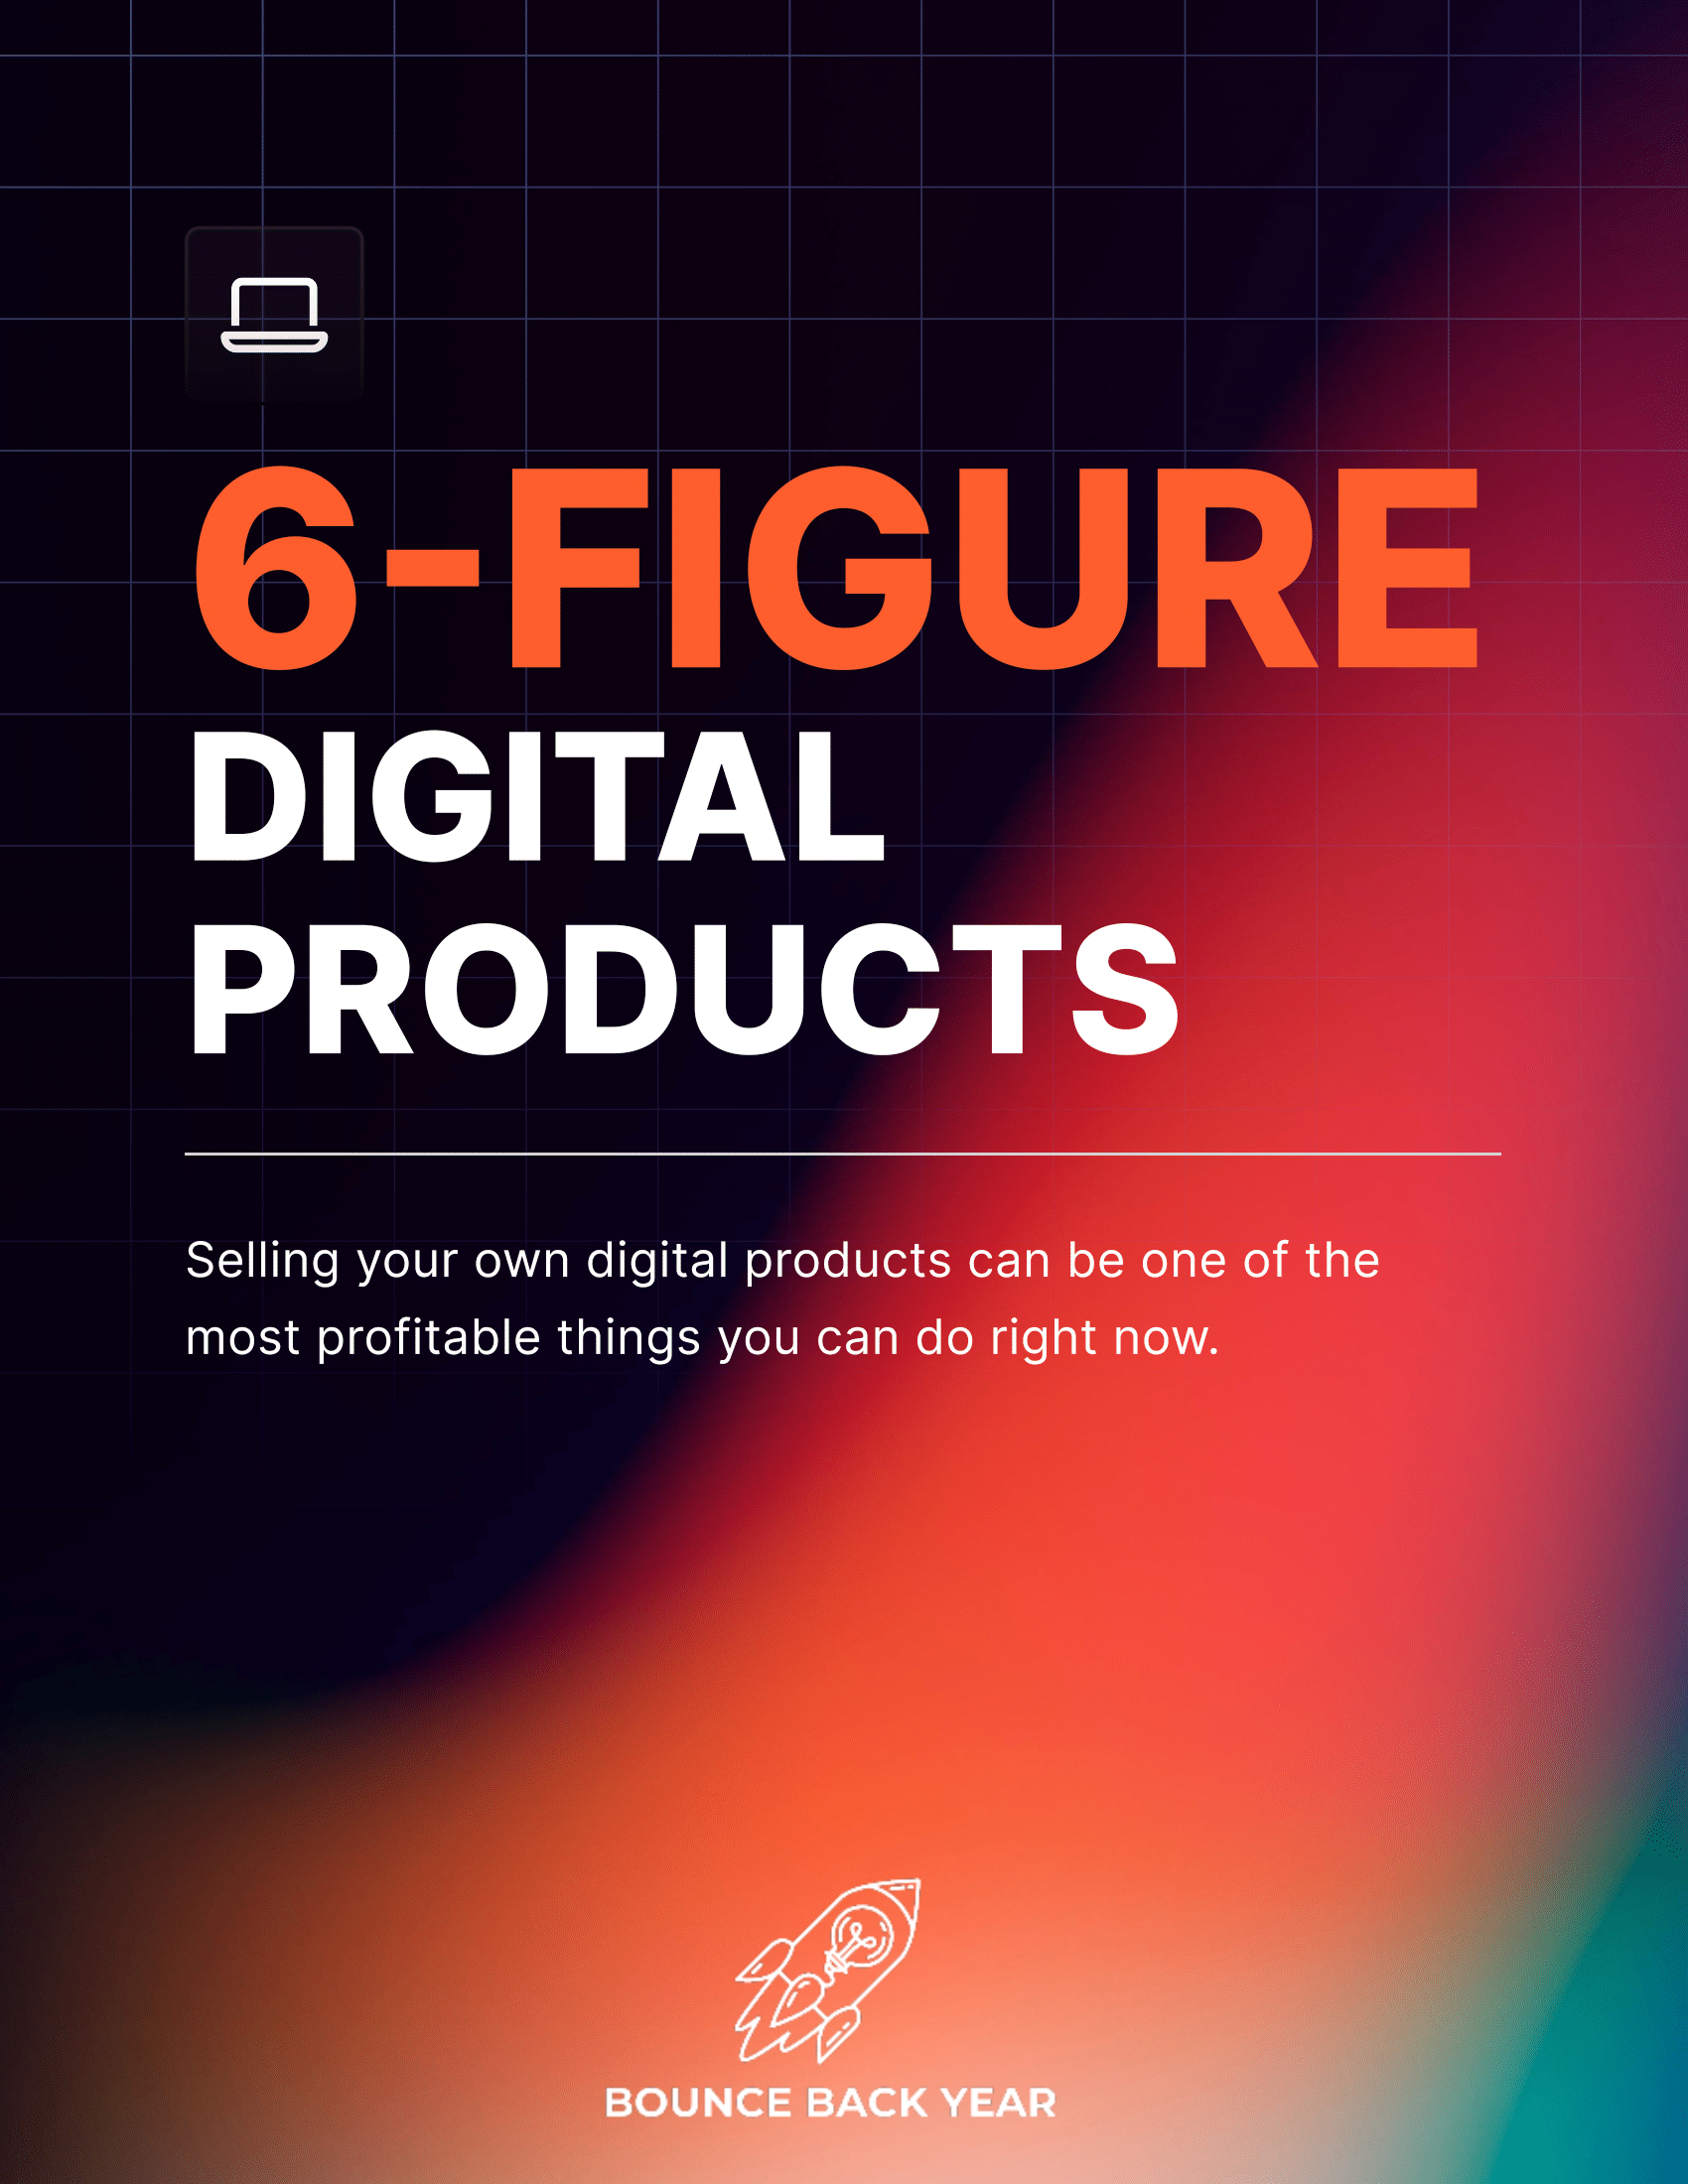 BUNDLE: Access All Of Our DIGITAL PRODUCTS & SAVE $119.50